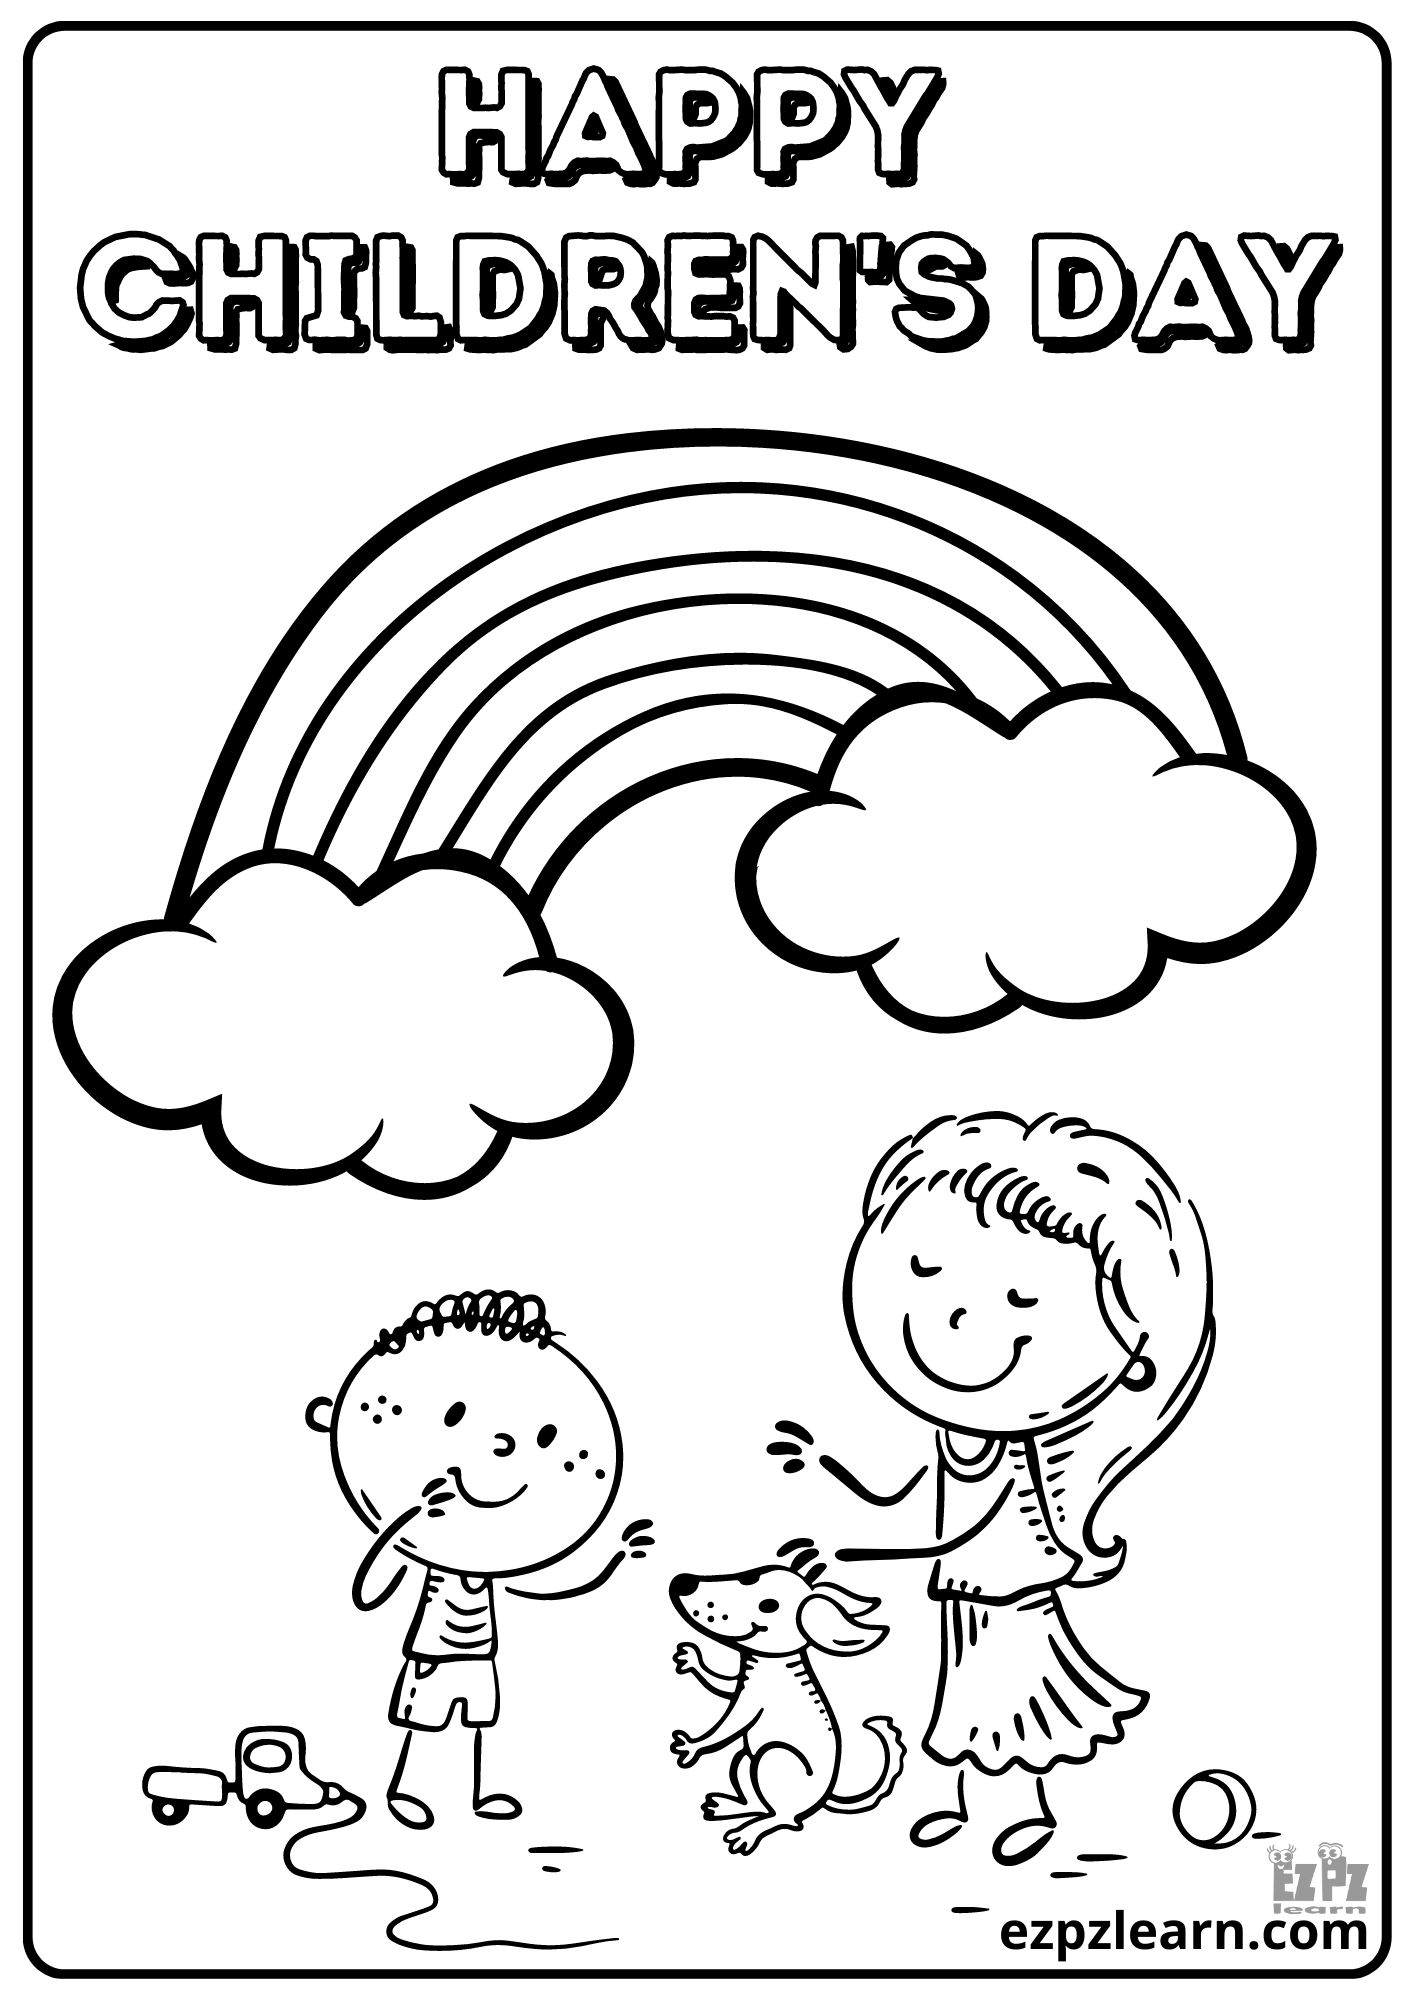 Children's Day Online Drawing Contest – Rotomaker Academy